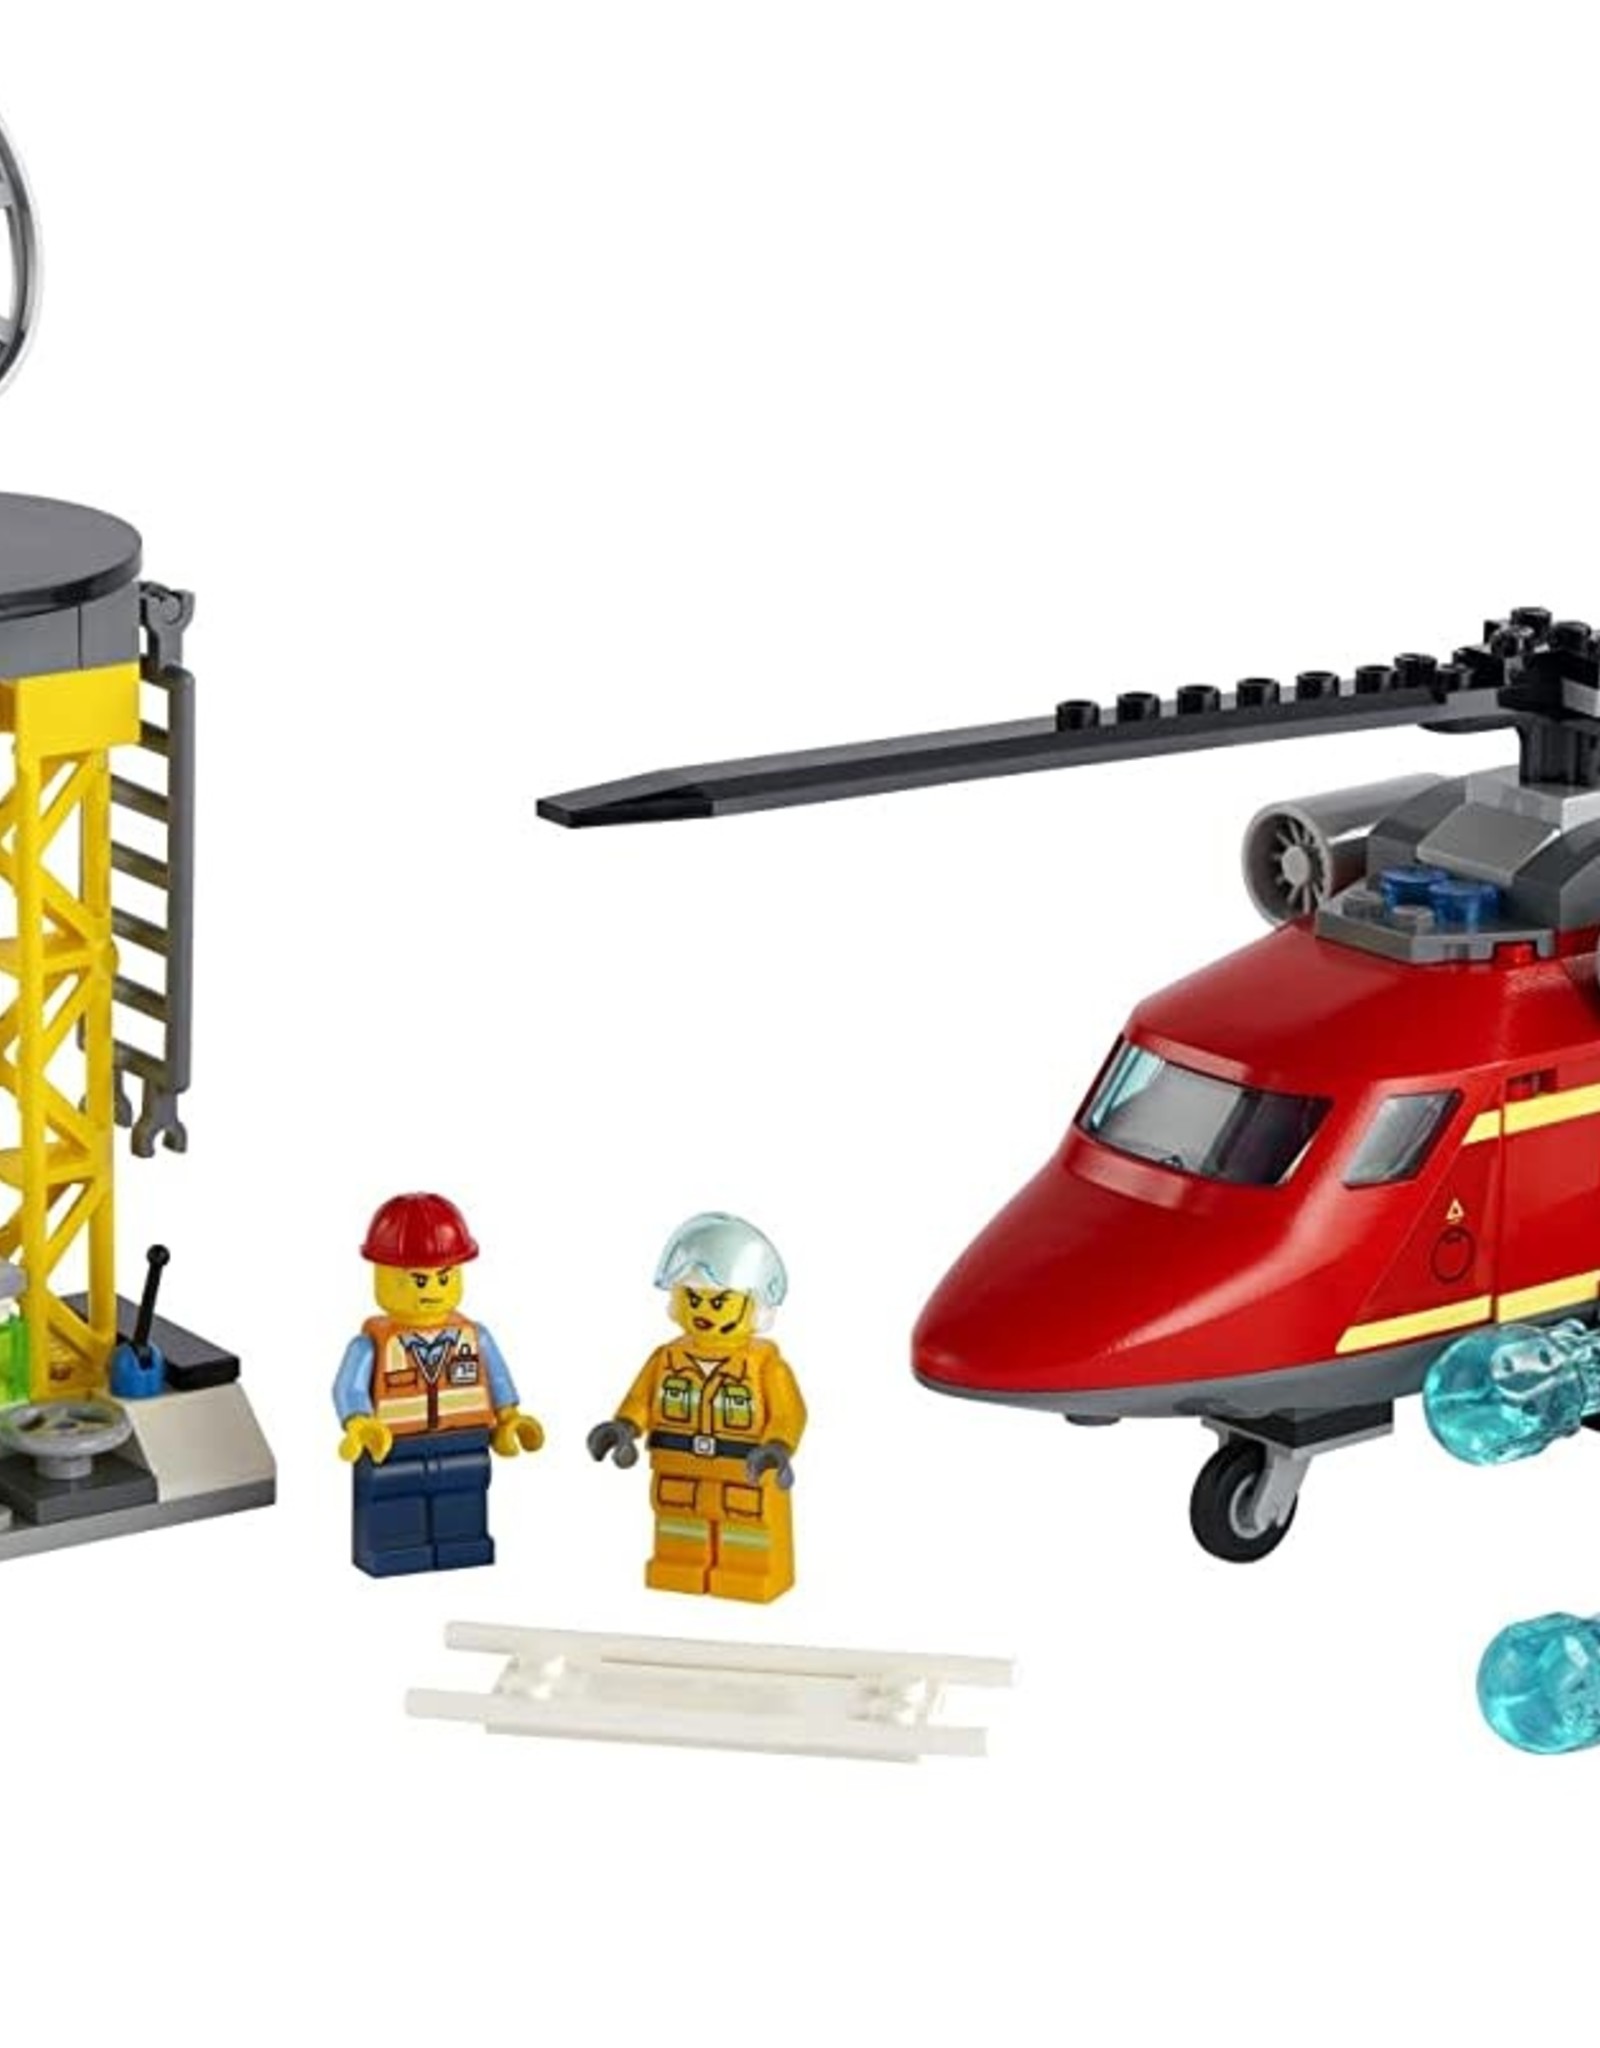 LEGO Lego City Fire Rescue Helicopter